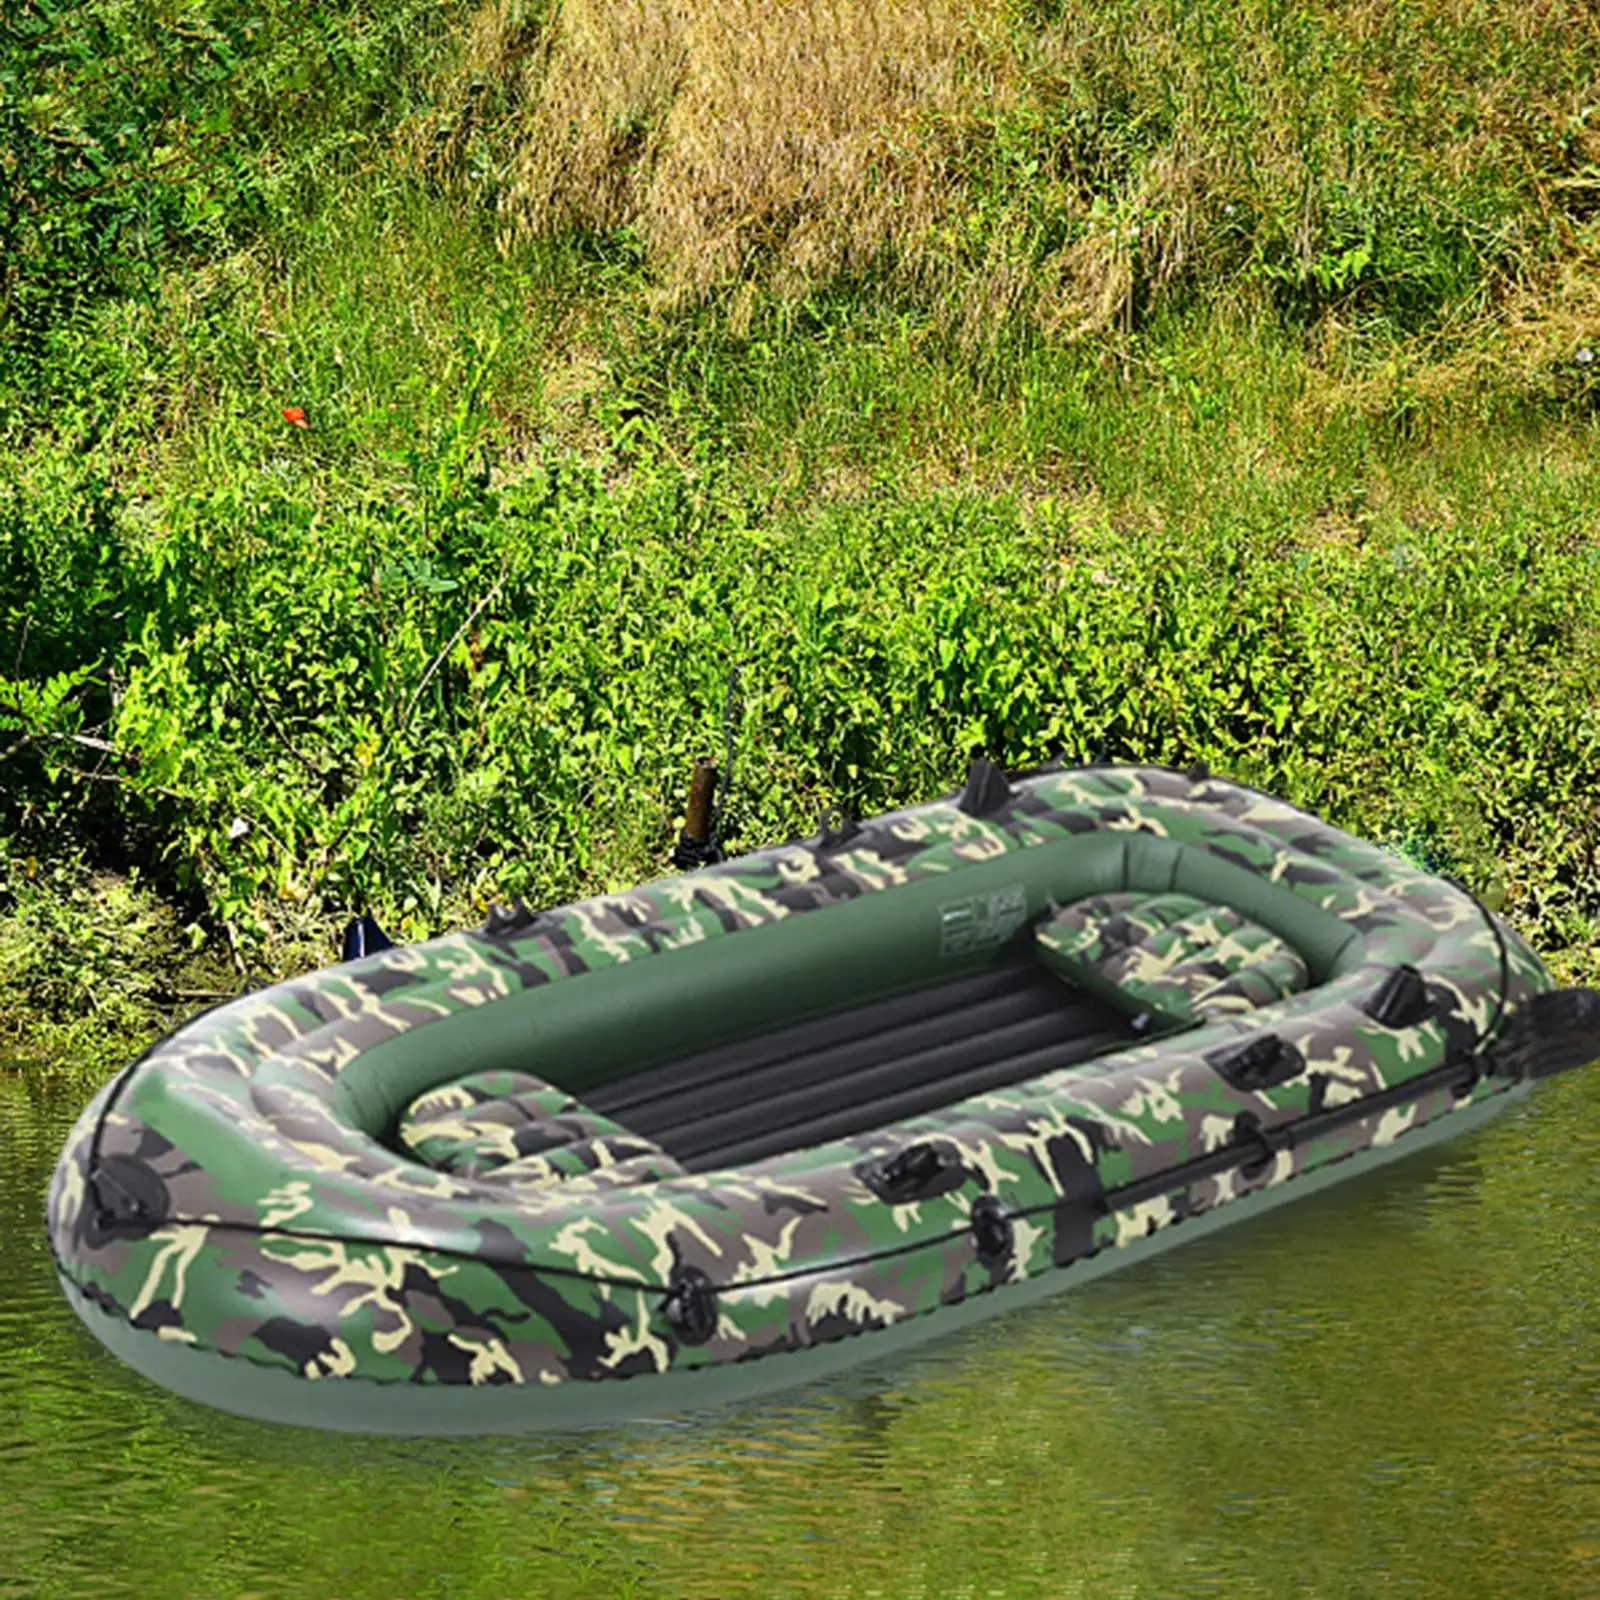 Inflatable Boat for Adults, 4 Person Inflatable Touring Kayak, Portable Fishing